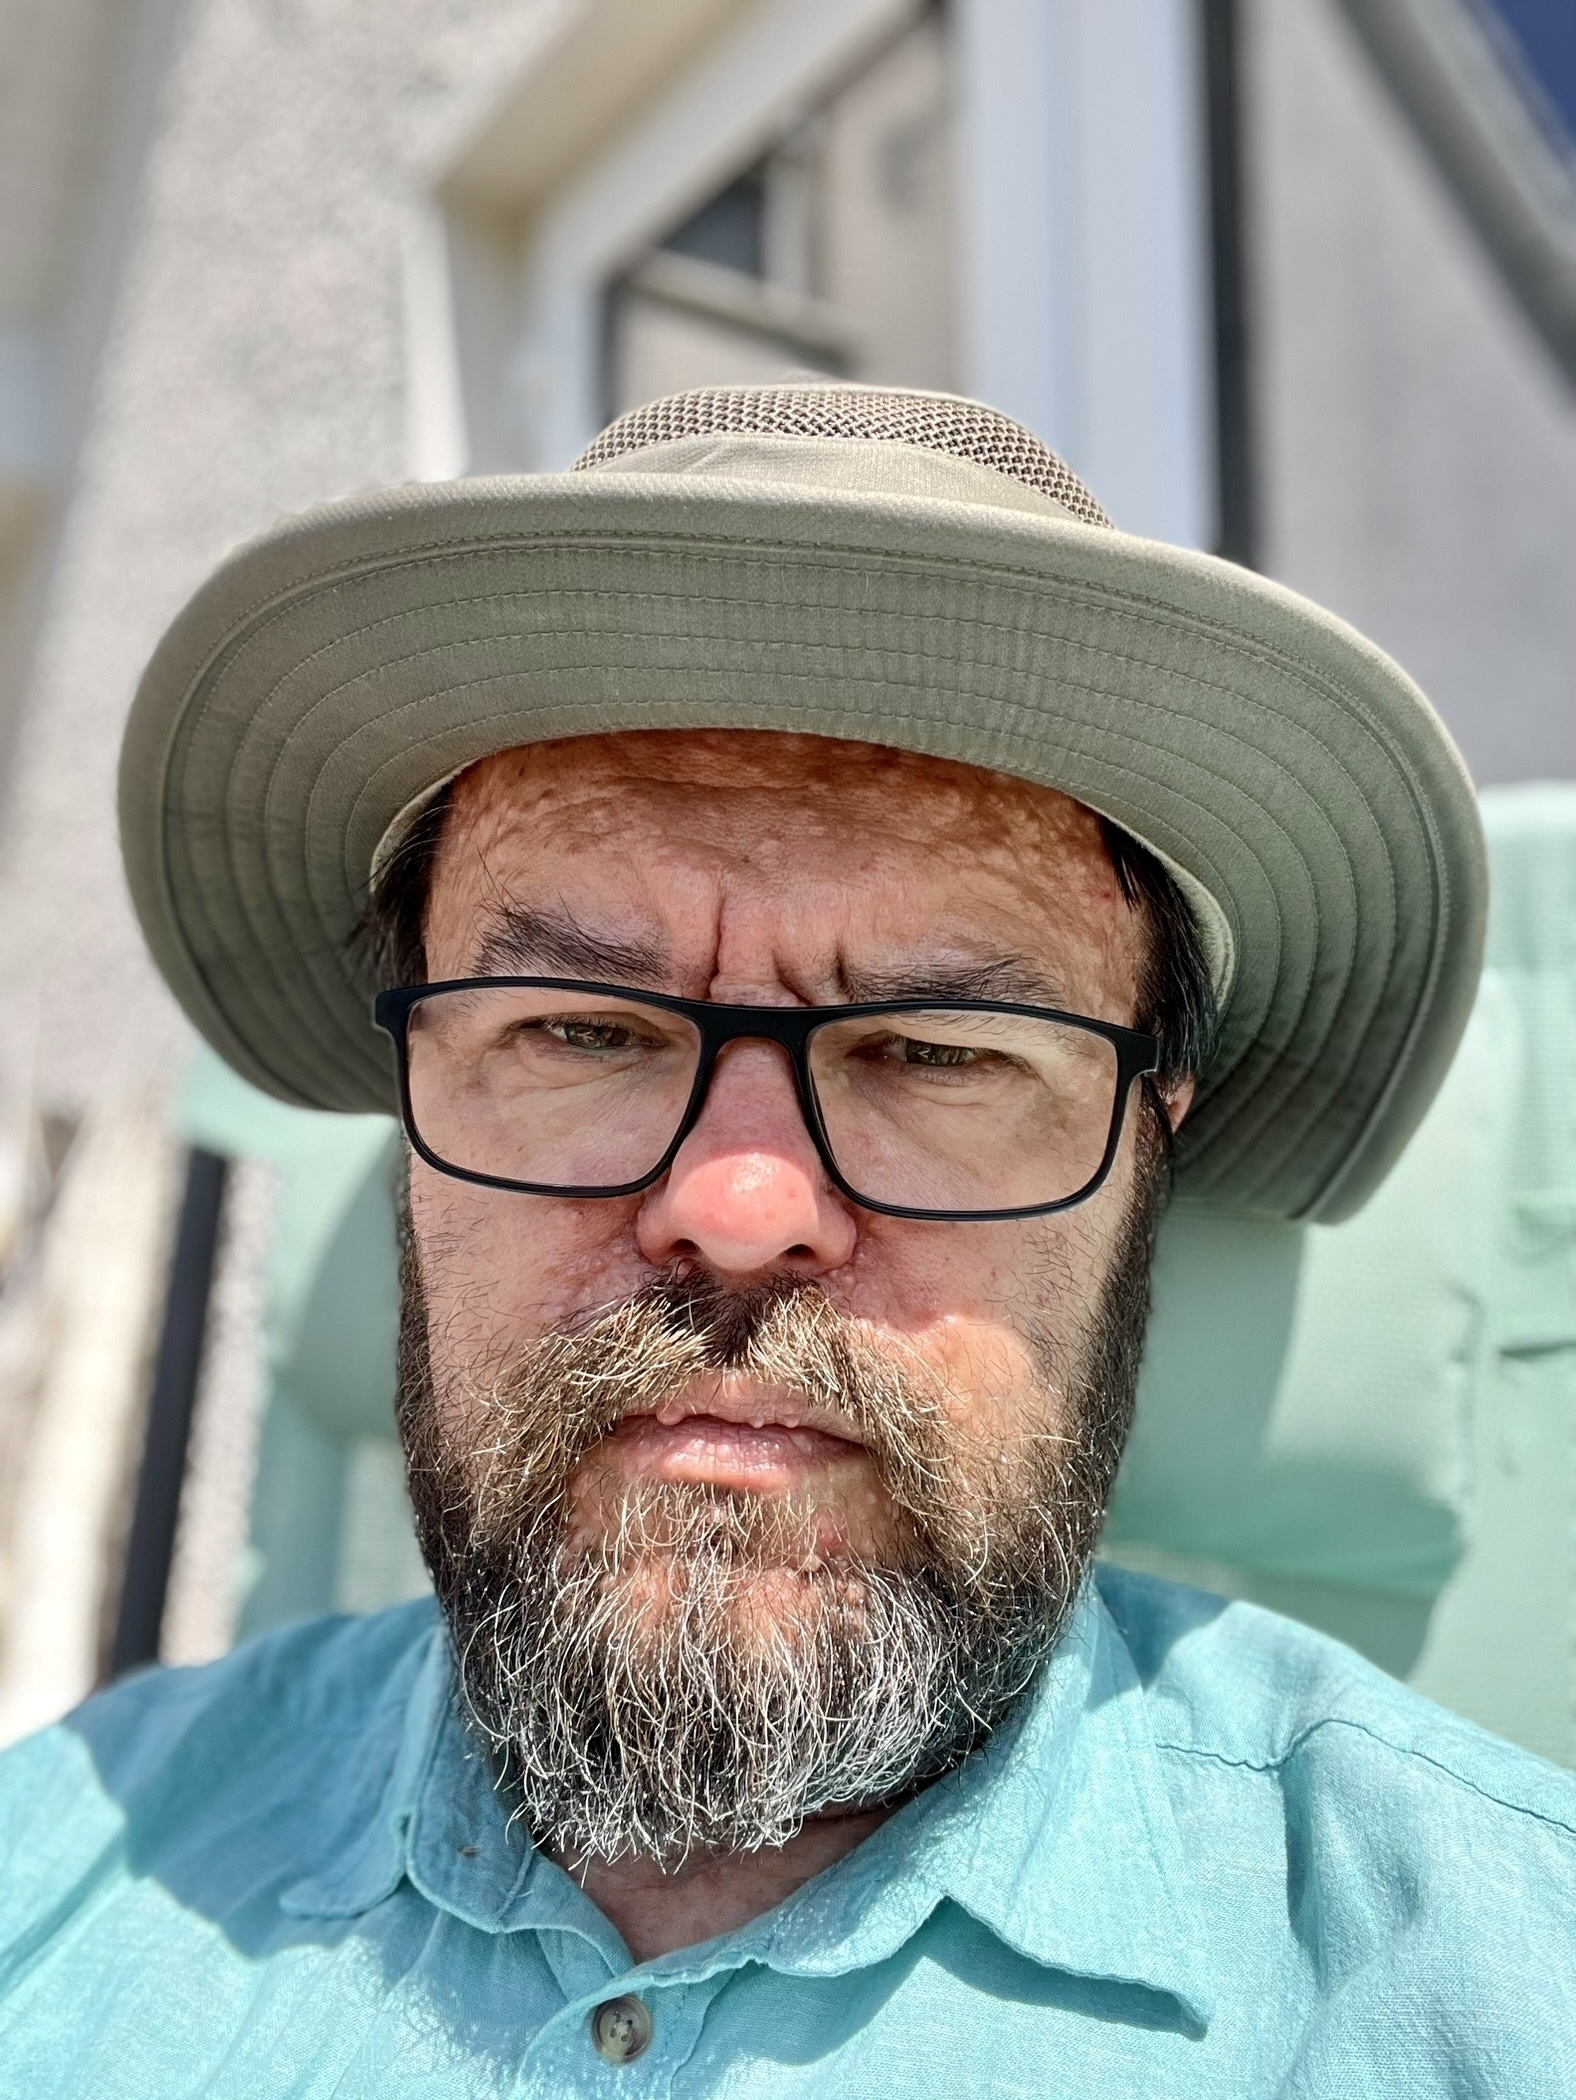 A grumpy bearded old man looks morosely at the camera, a hat atop his head